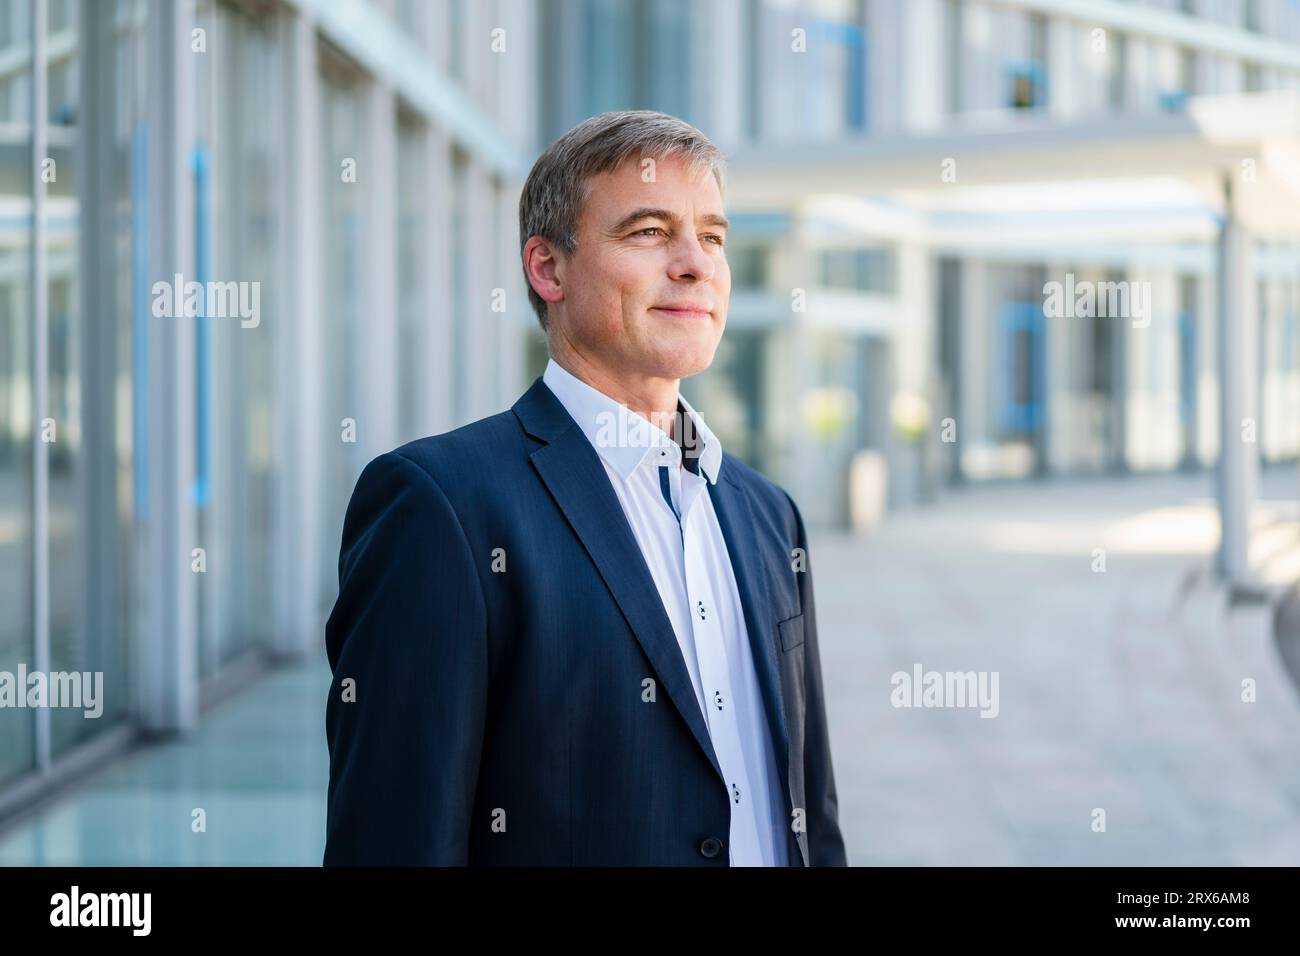 Portrait of a successful businessman in office building Stock Photo